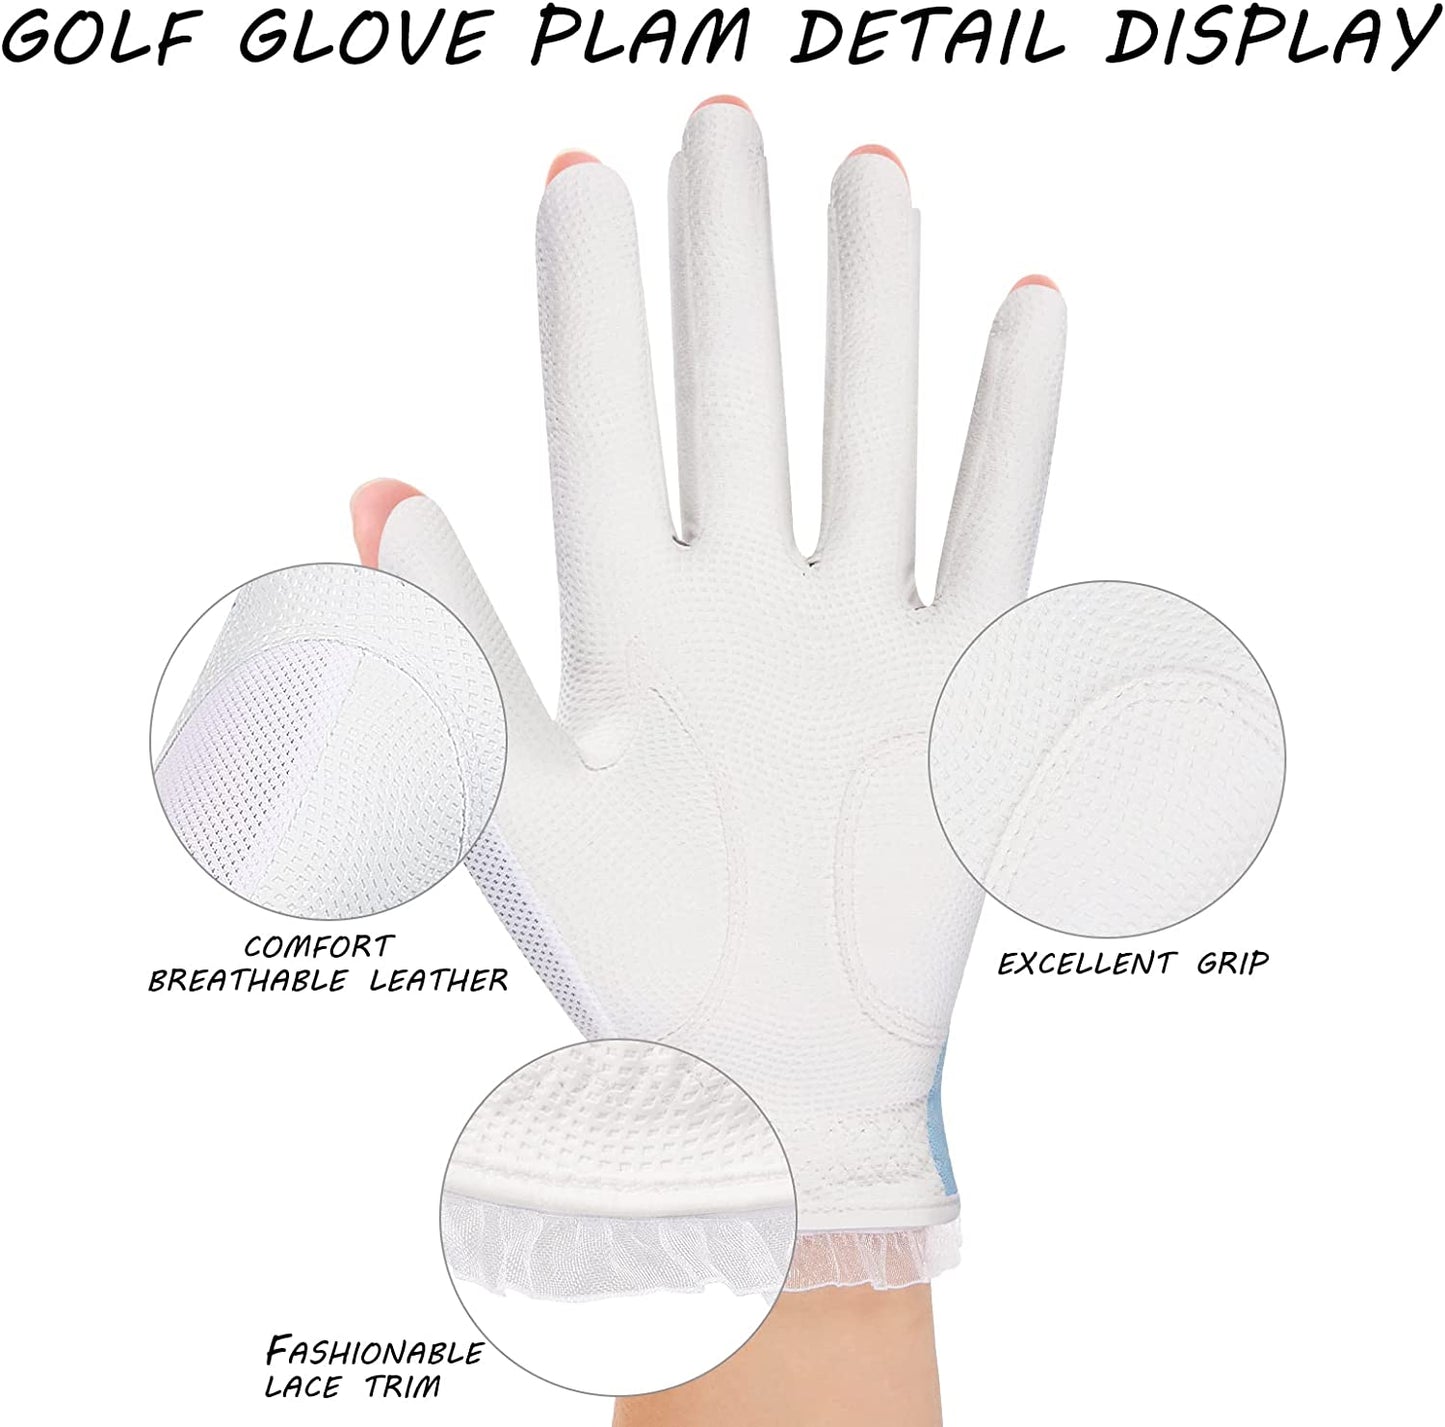 wosofe Golf Gloves for Women Half 1/3 Finger Soft Leather Breathable Extra Grip Accessories Fit Ladies Girls Sport Gloves 1 Pair 3 Colors Optional